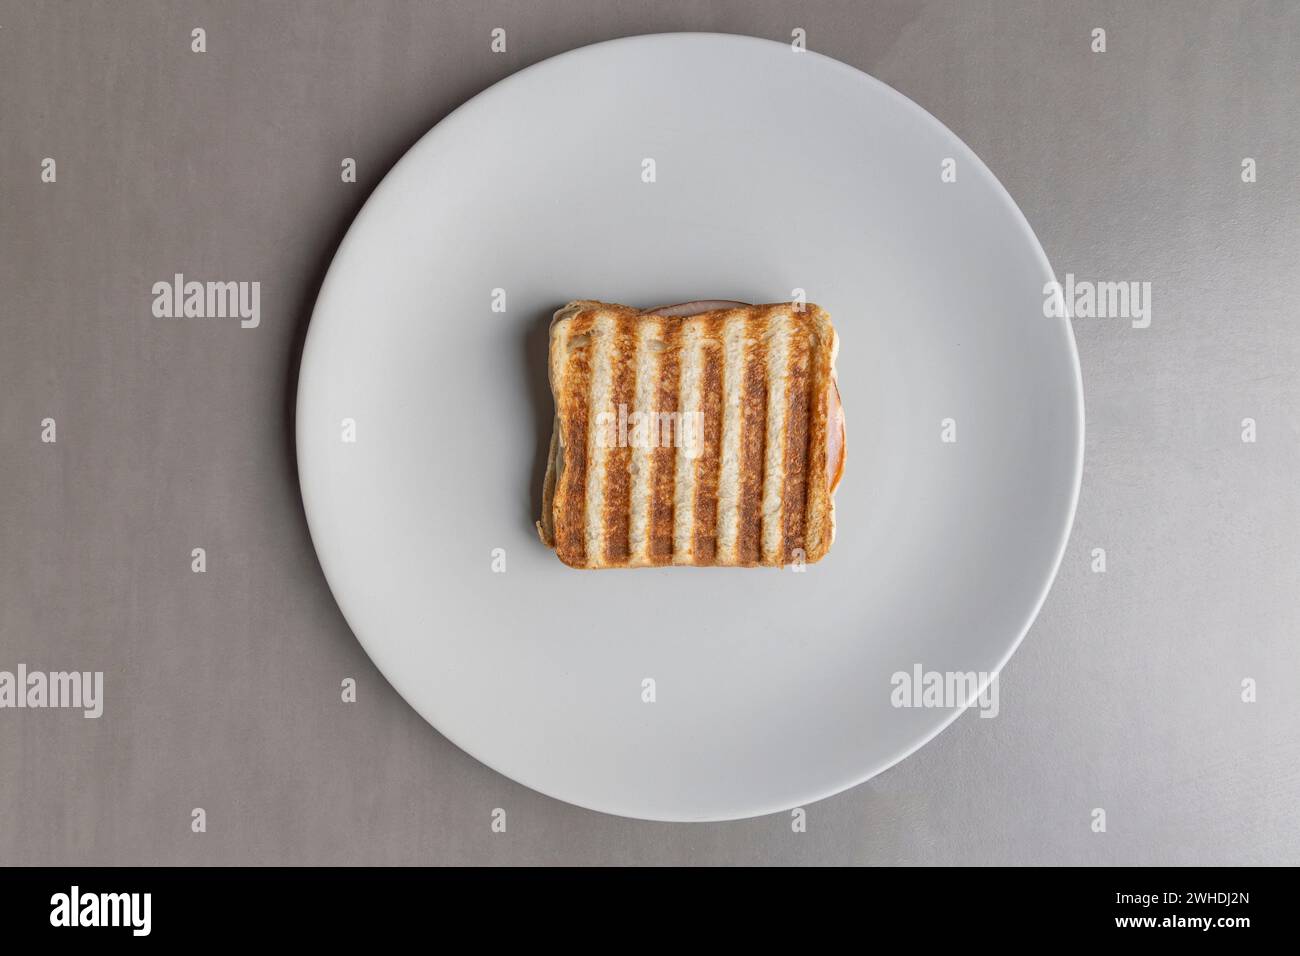 A grilled ham toast sandwich with a striped pattern lies on a light gray plate against a gray background Stock Photo